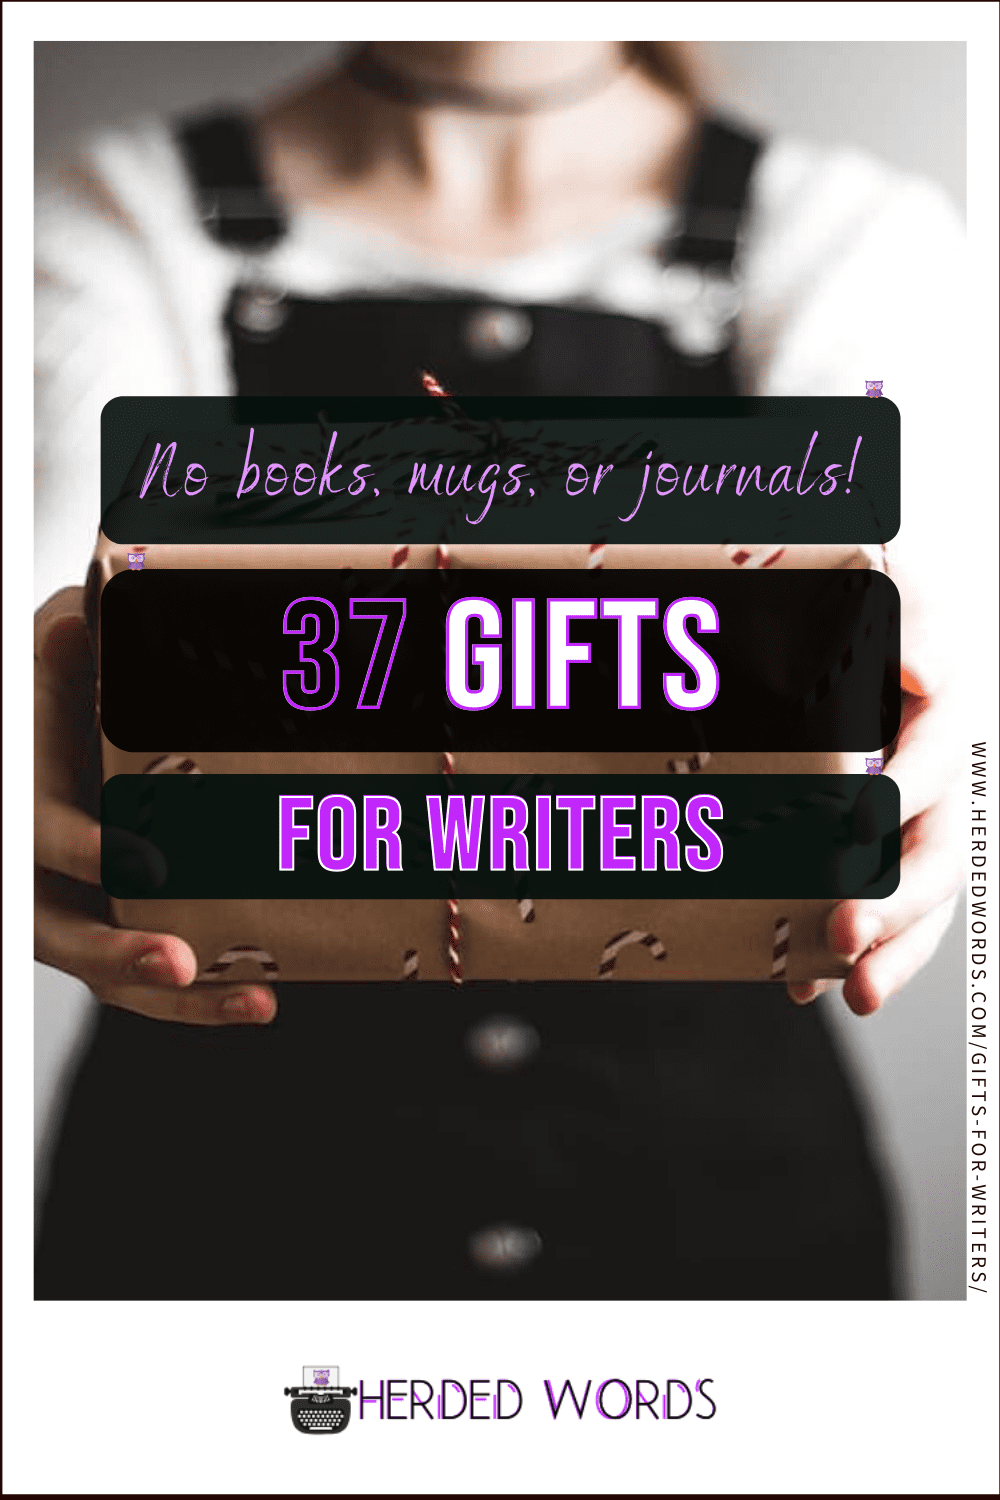 Image Link to 37 Gifts for Writers (no books, mugs, or journals)